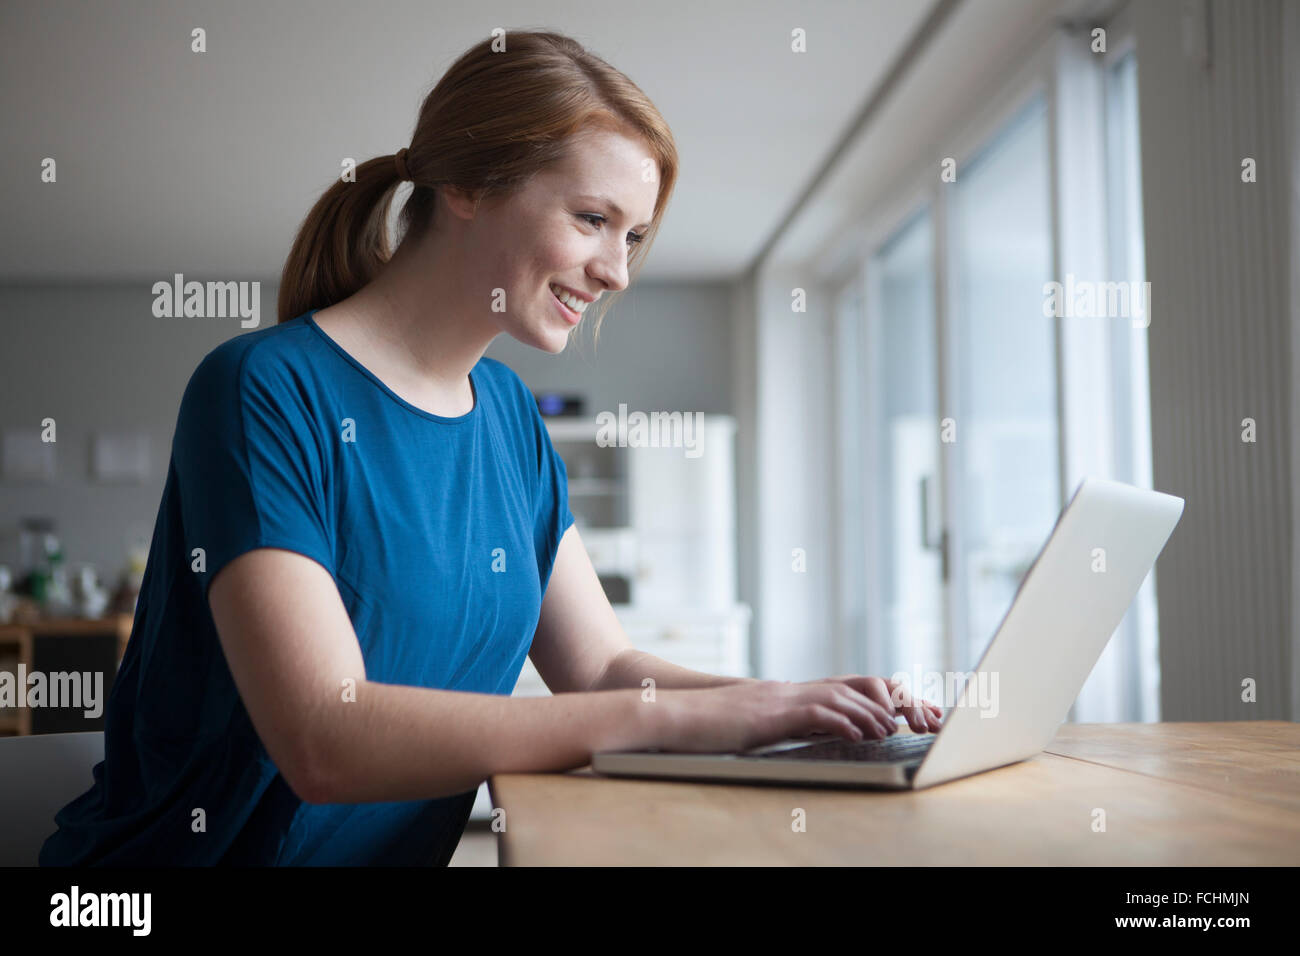 Smiling young woman sitting at table using laptop Stock Photo